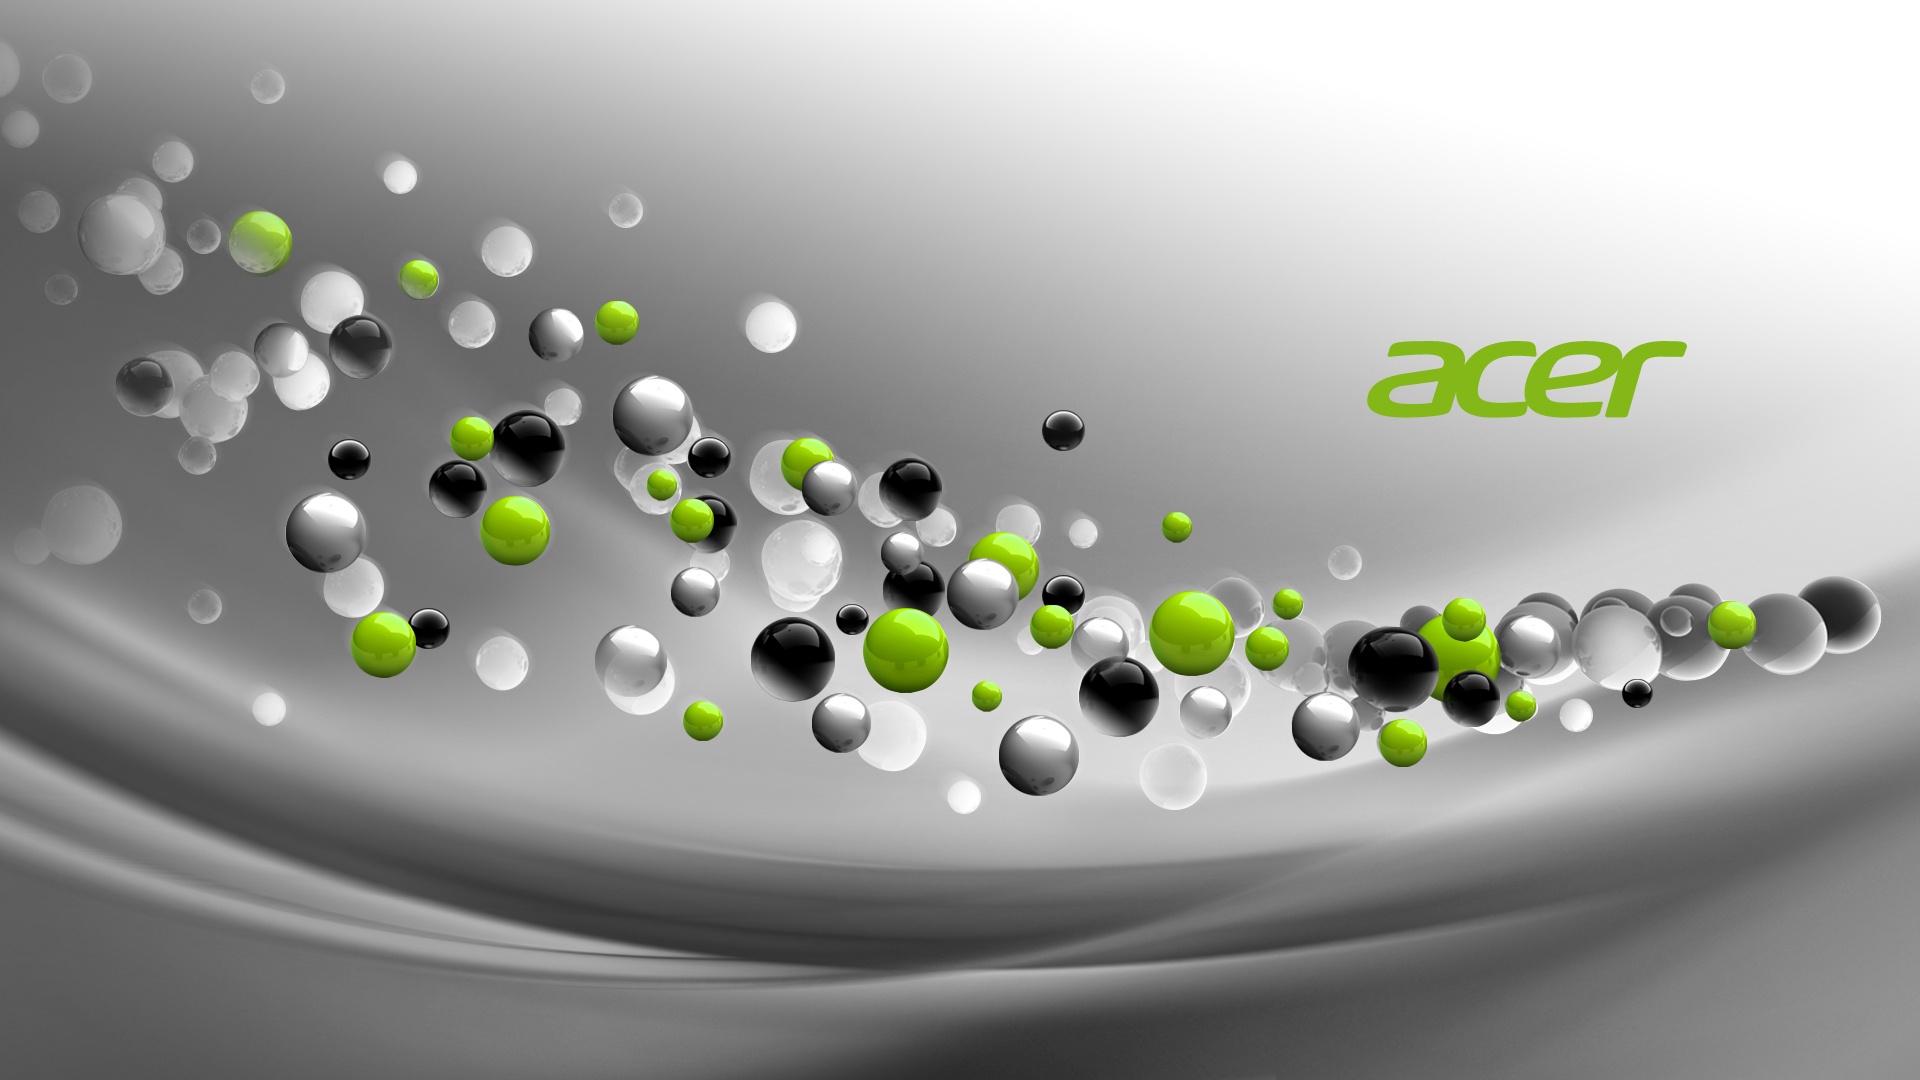 acer laptop themes for windows 8 free download